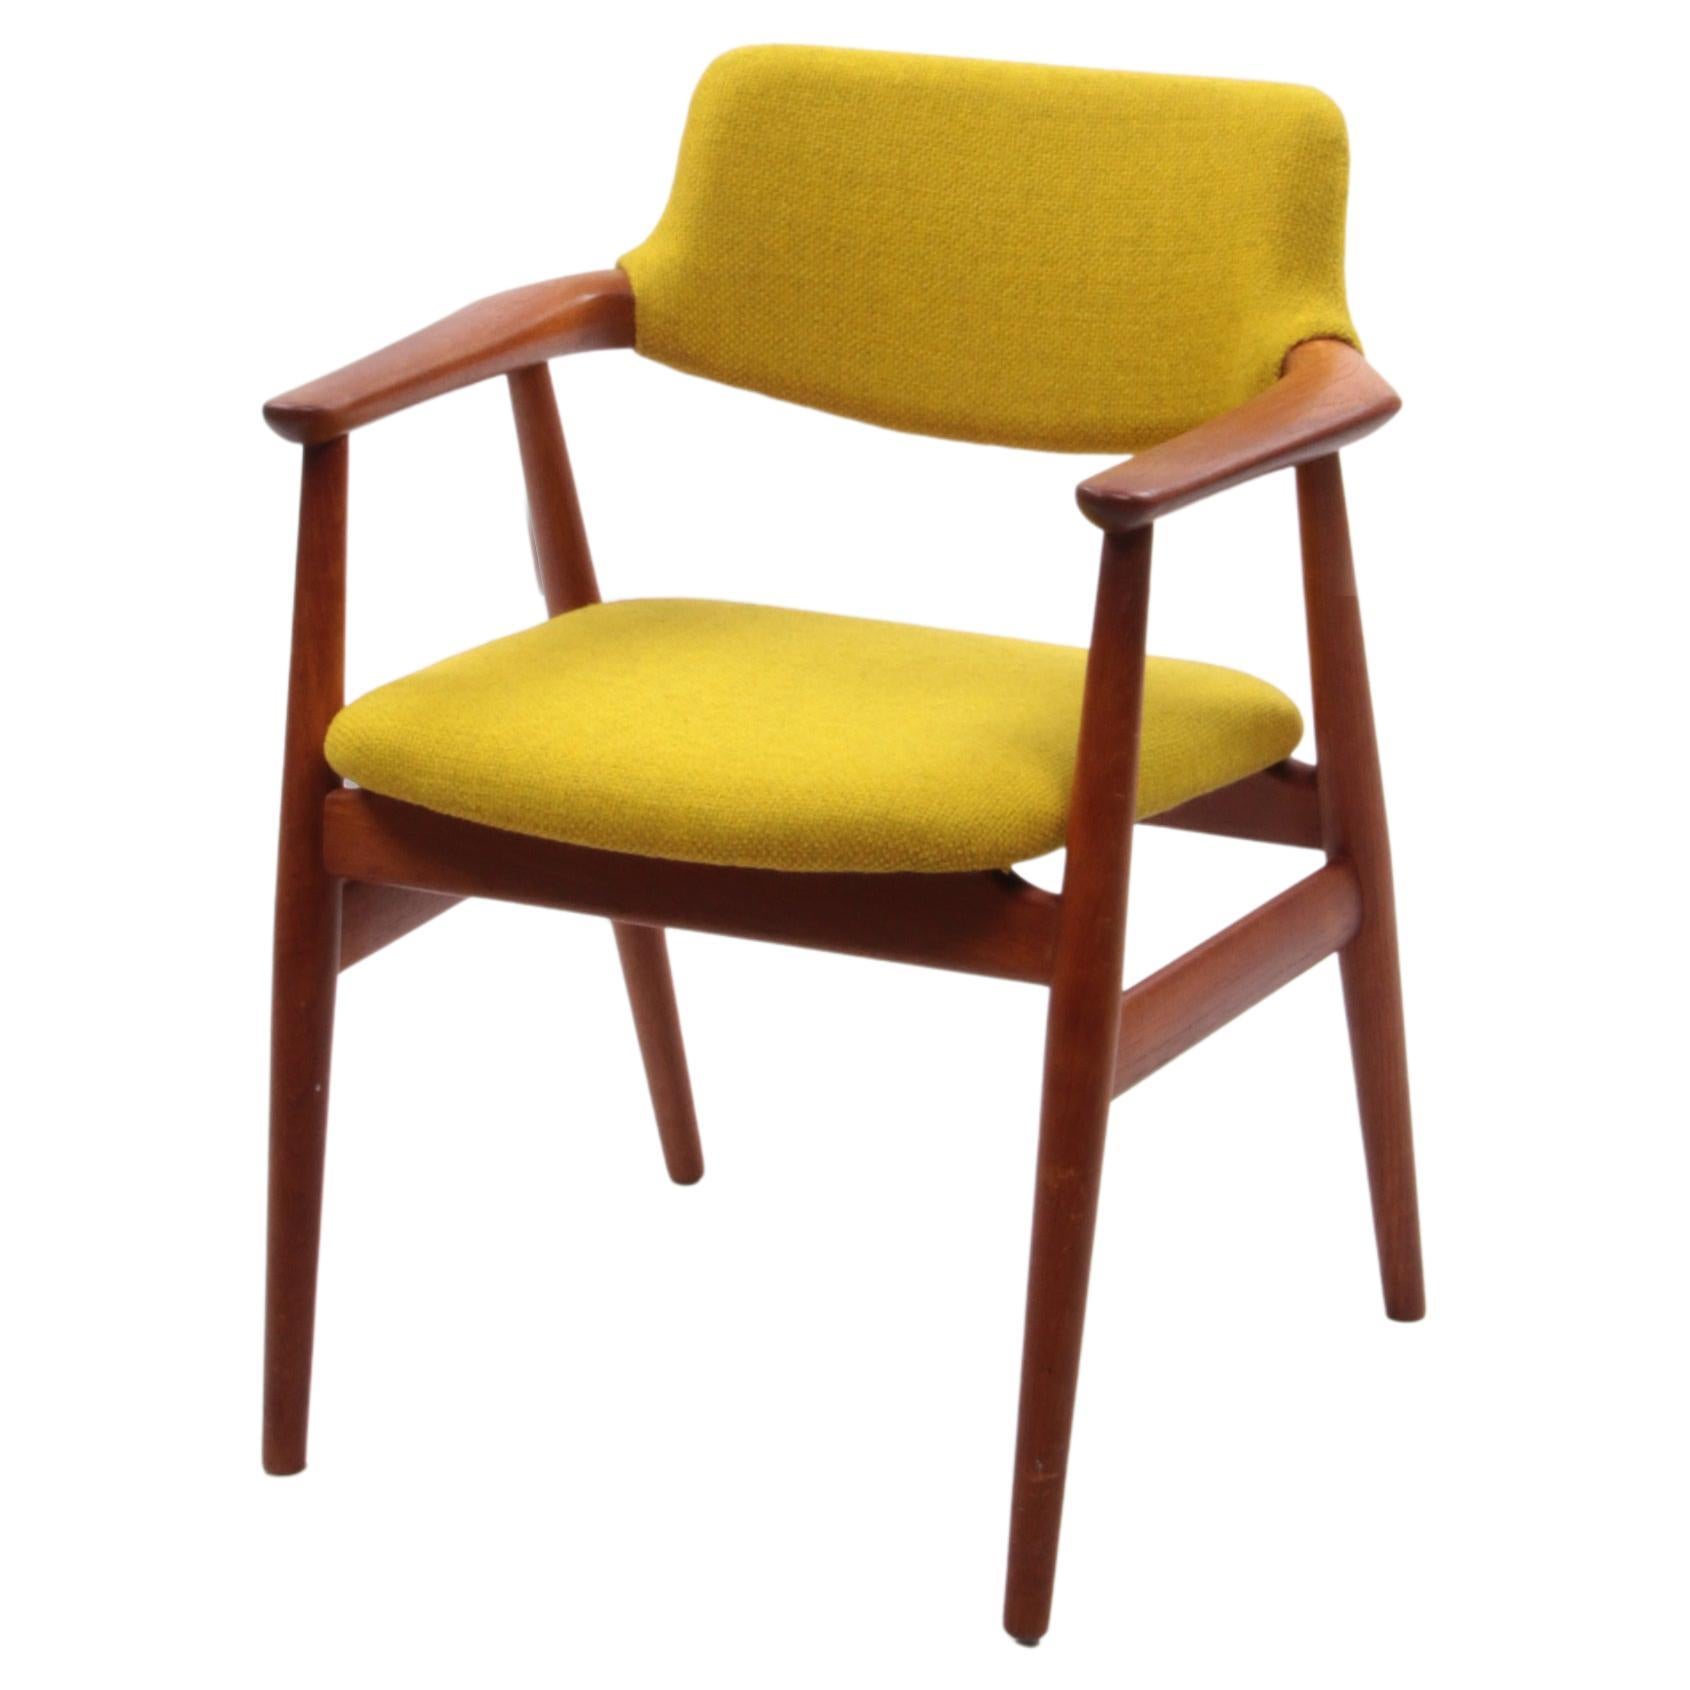 Danish Dining Room Chair by Svend Age Eriksen Model Gm11, 1960s